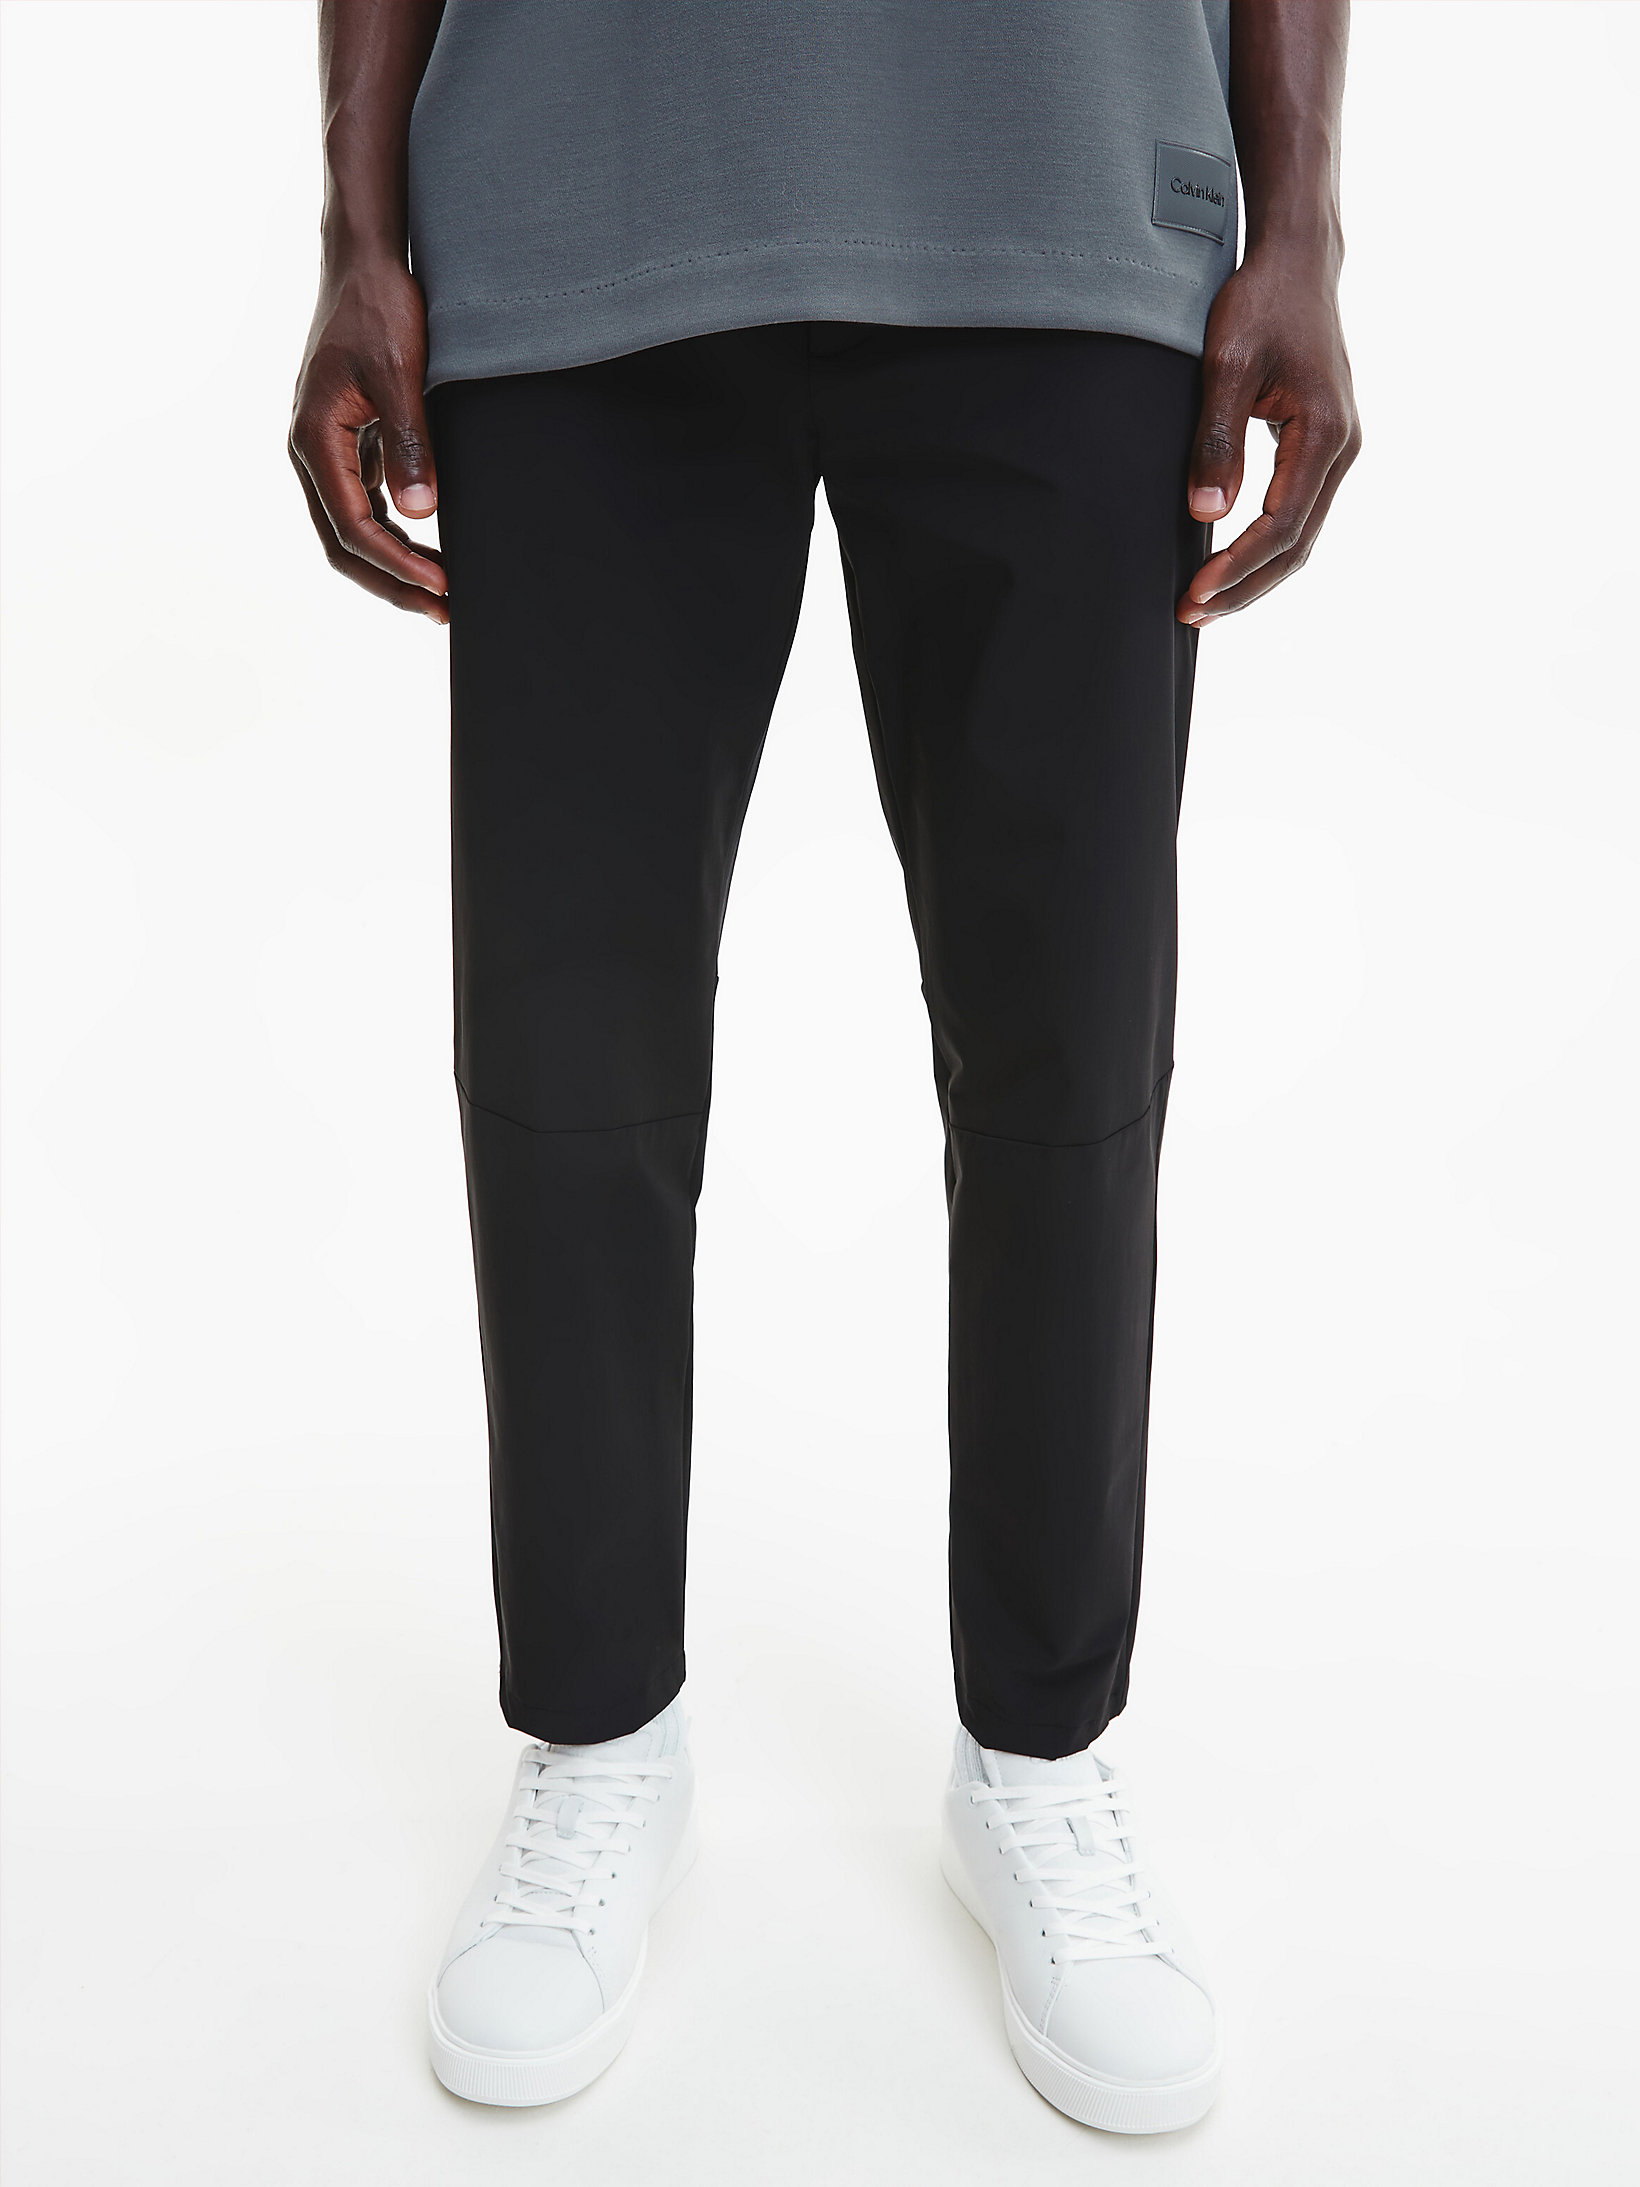 CK Black Tapered Stretch Twill Trousers undefined men Calvin Klein